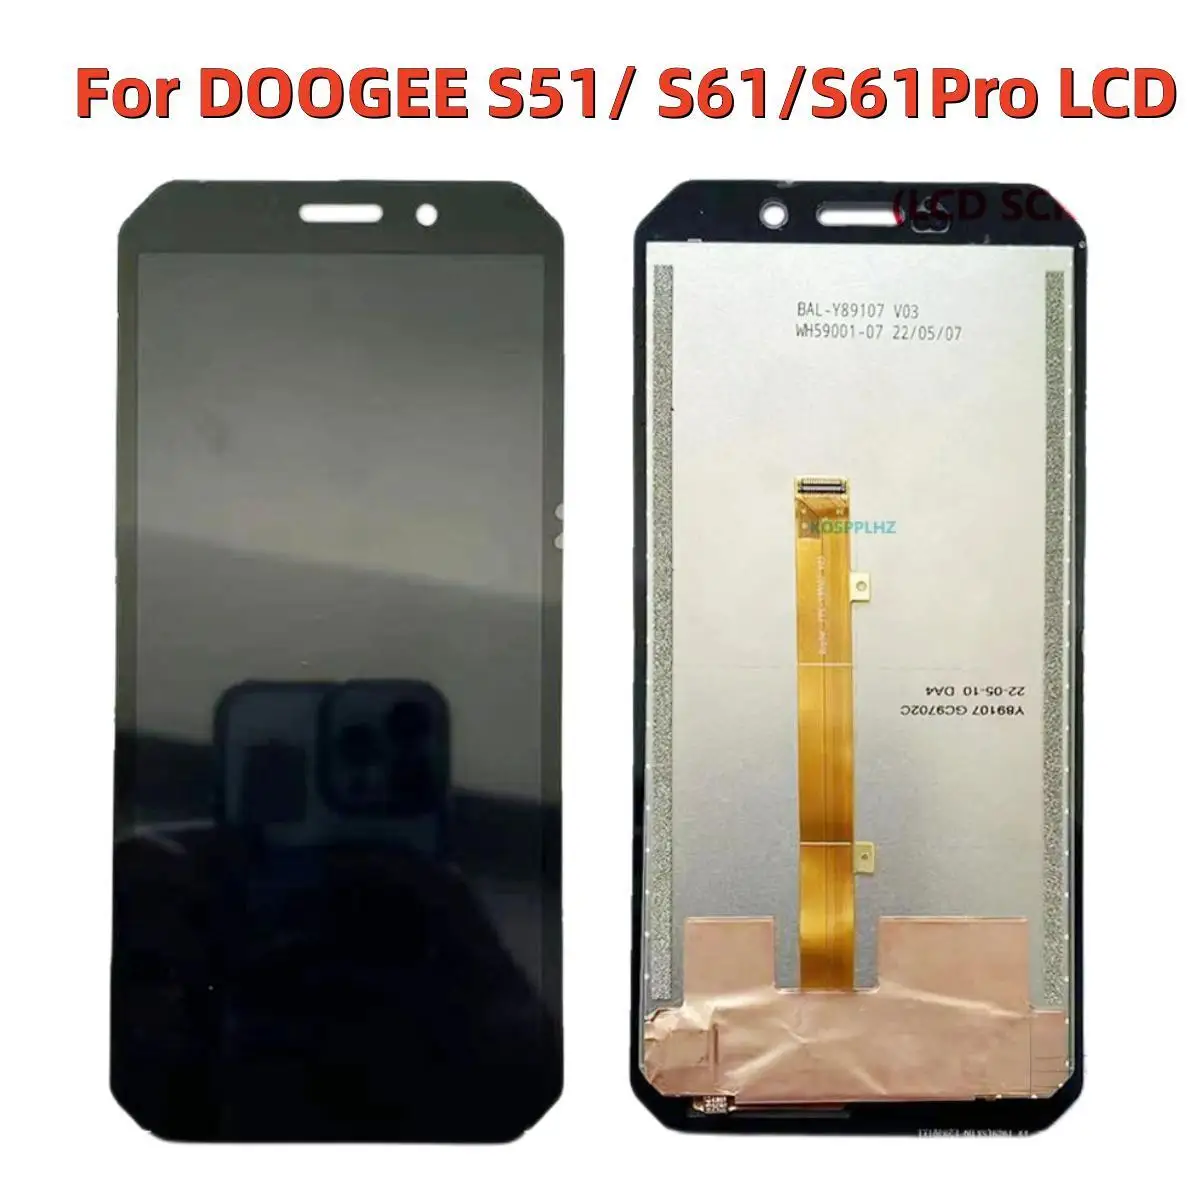 

Original For DOOGEE S51 S61 LCD Display Screen + Touch Panel Digitizer Replacement For DOOGEE S61 Pro LCD Display